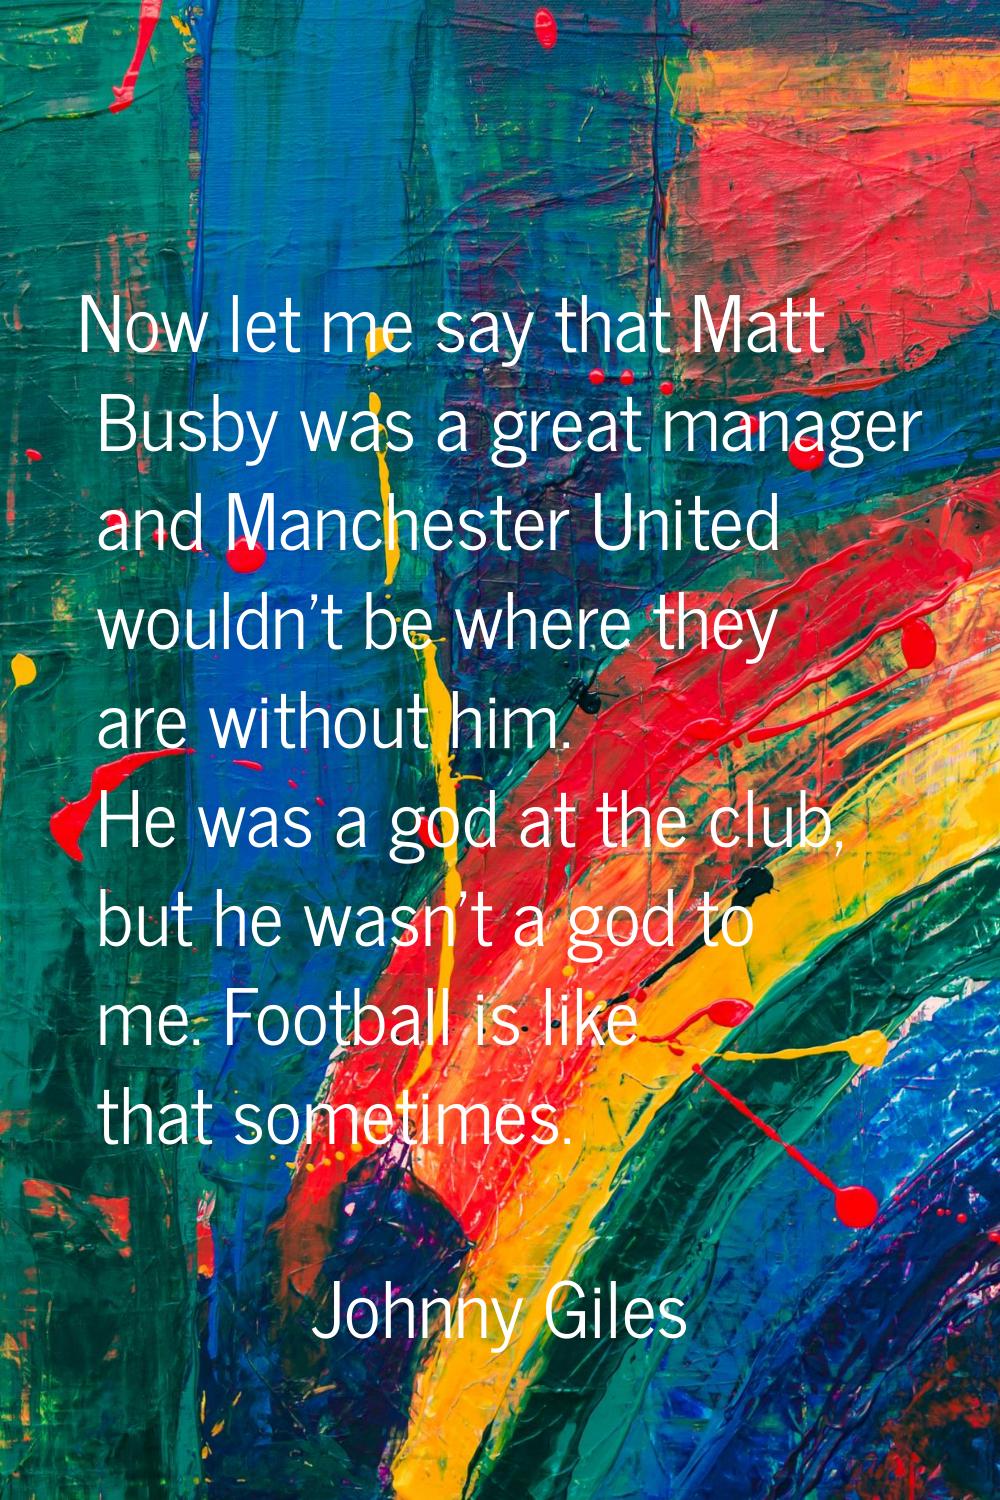 Now let me say that Matt Busby was a great manager and Manchester United wouldn't be where they are